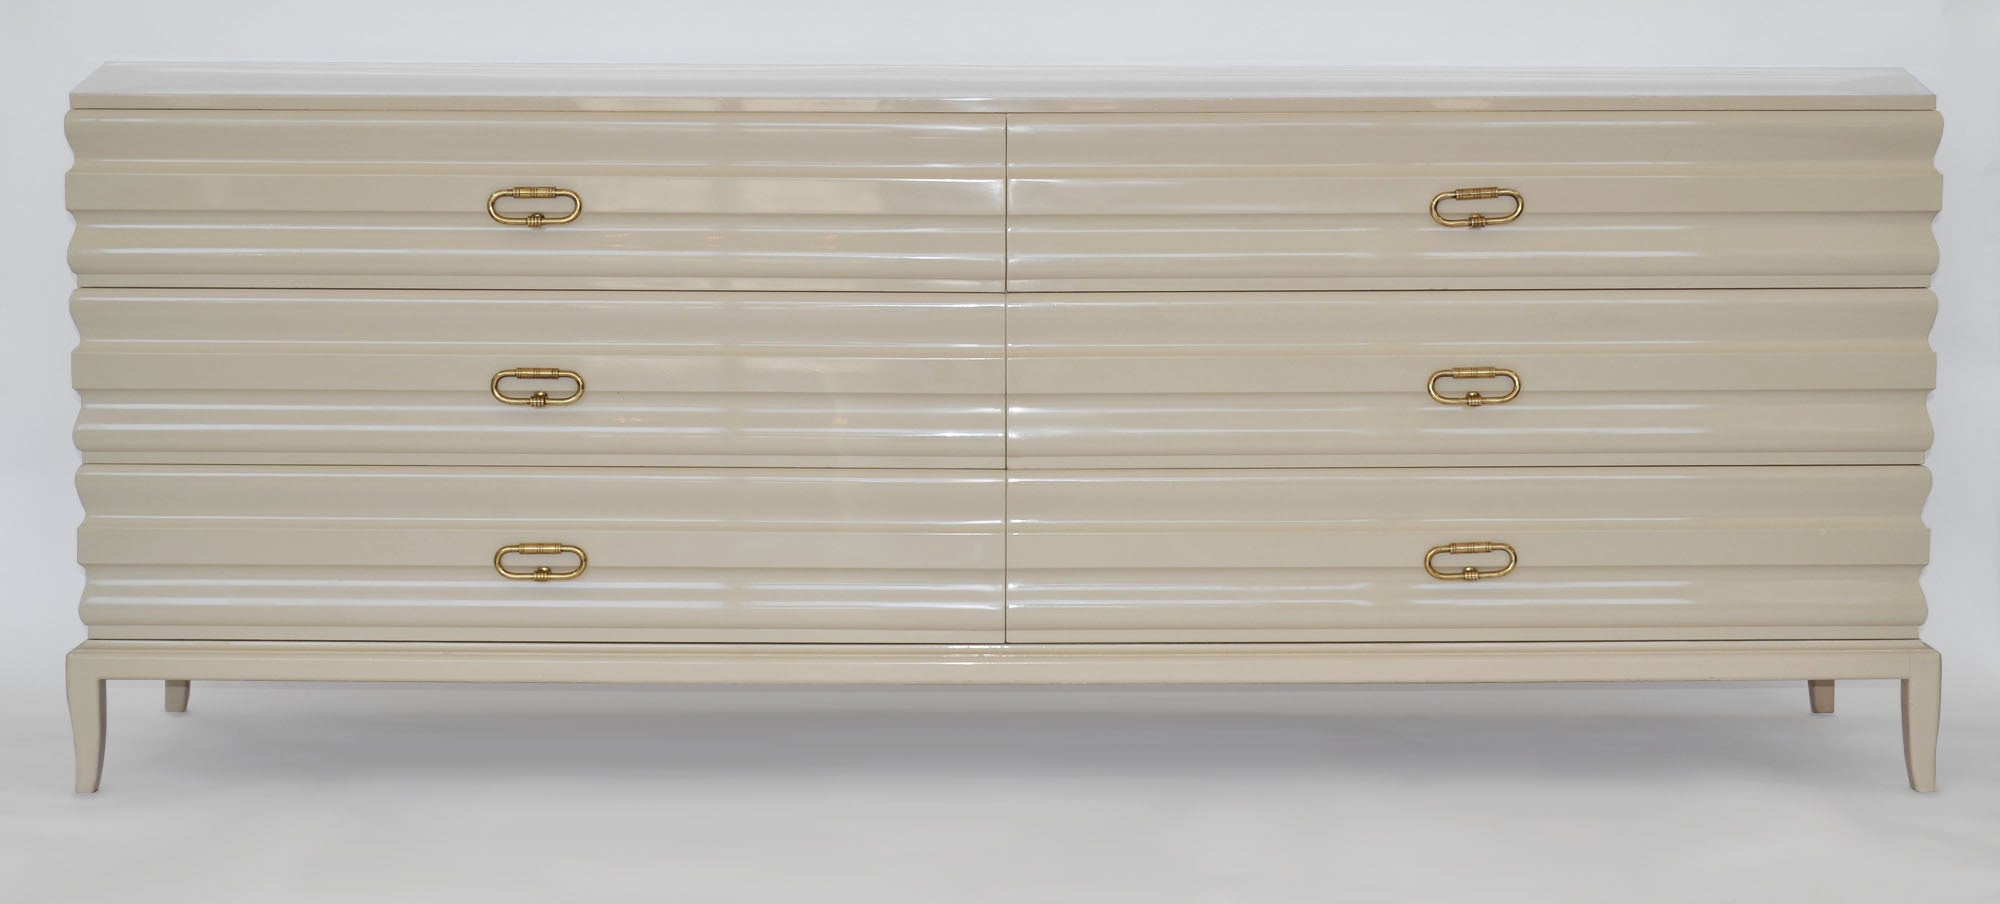 Sculpted-Front Chest of Drawers by Tommi Parzinger, Oatmeal with Brass Pulls